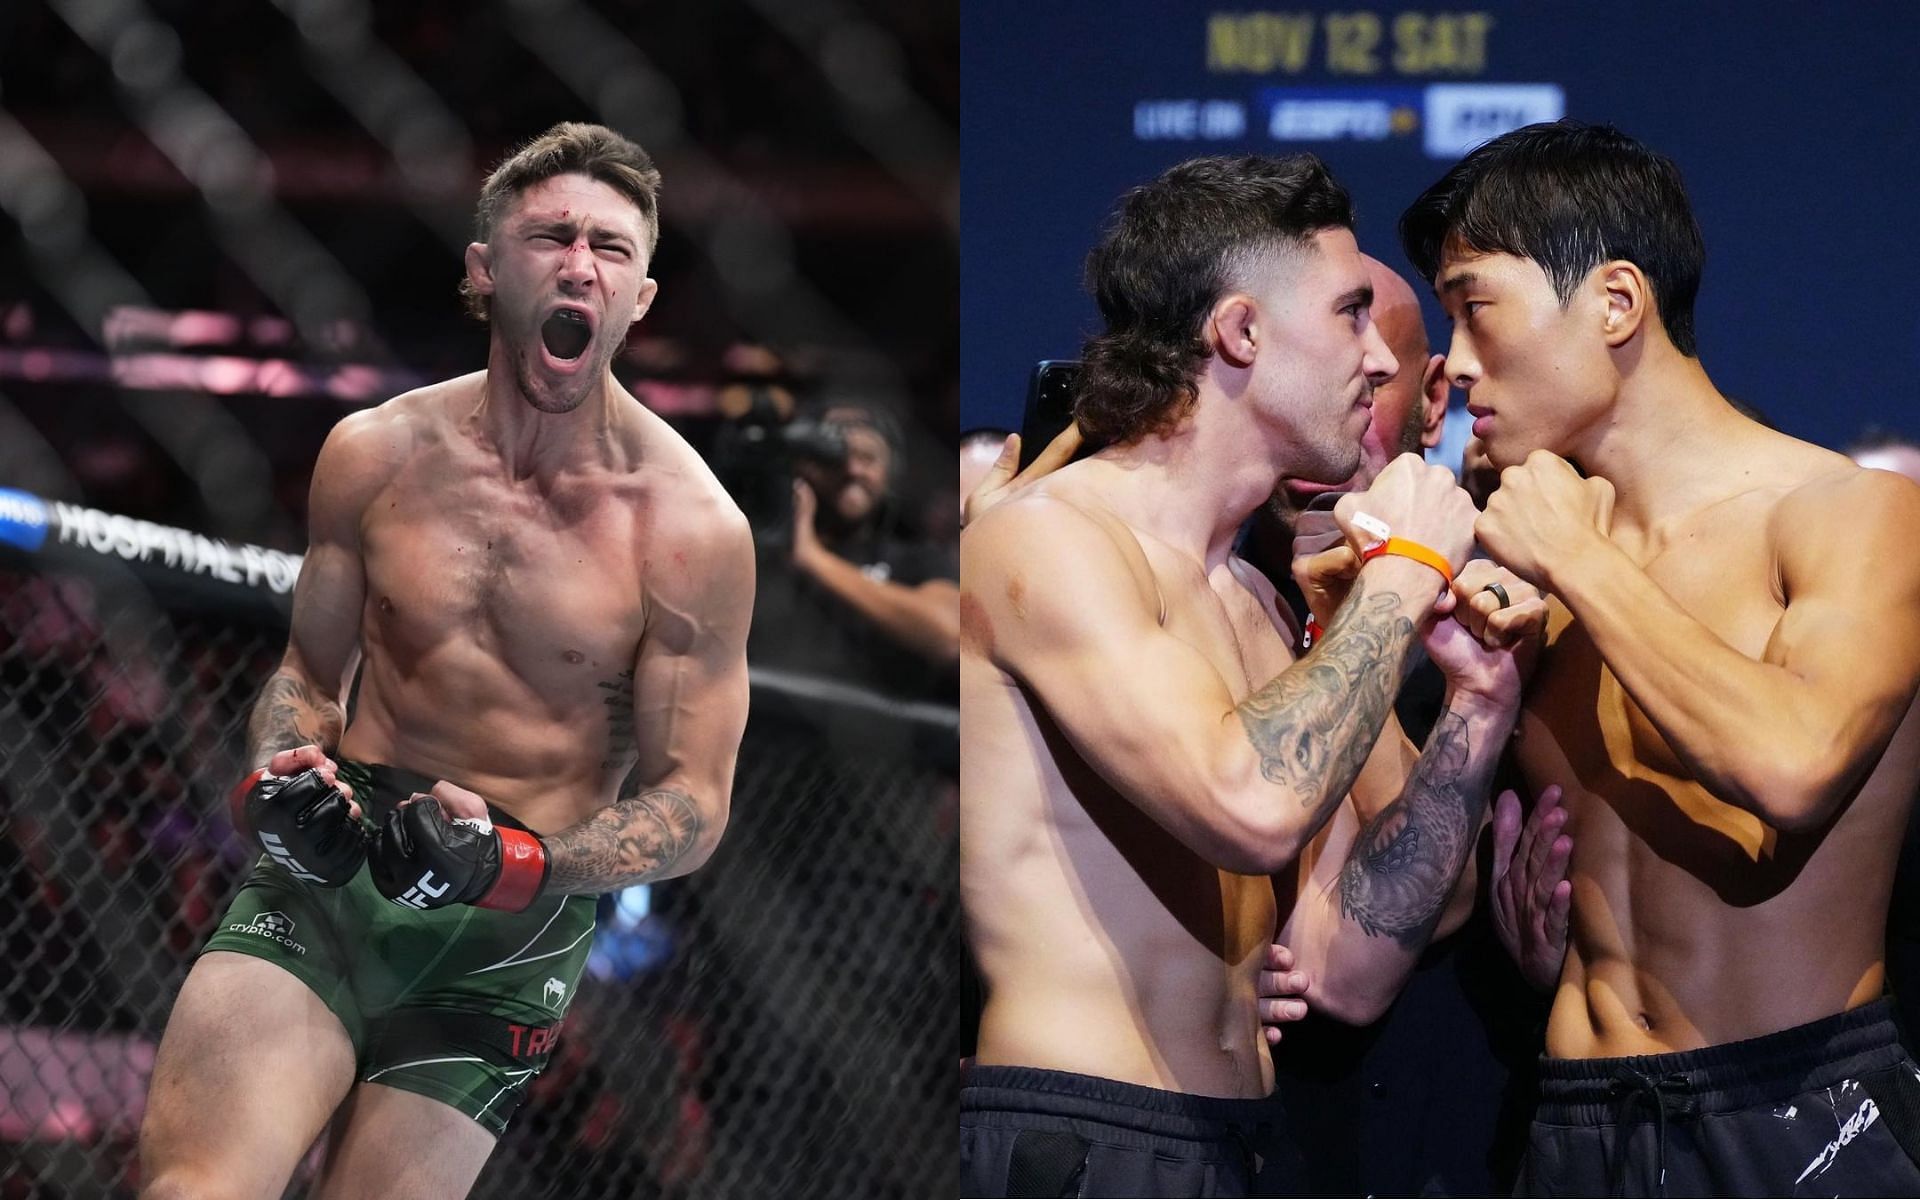 Watch: Michael Trizano and Choi Seung-Woo deliver a wild double knockdown at UFC 281 [Images via: @ufc and @cswooo on Instagram]